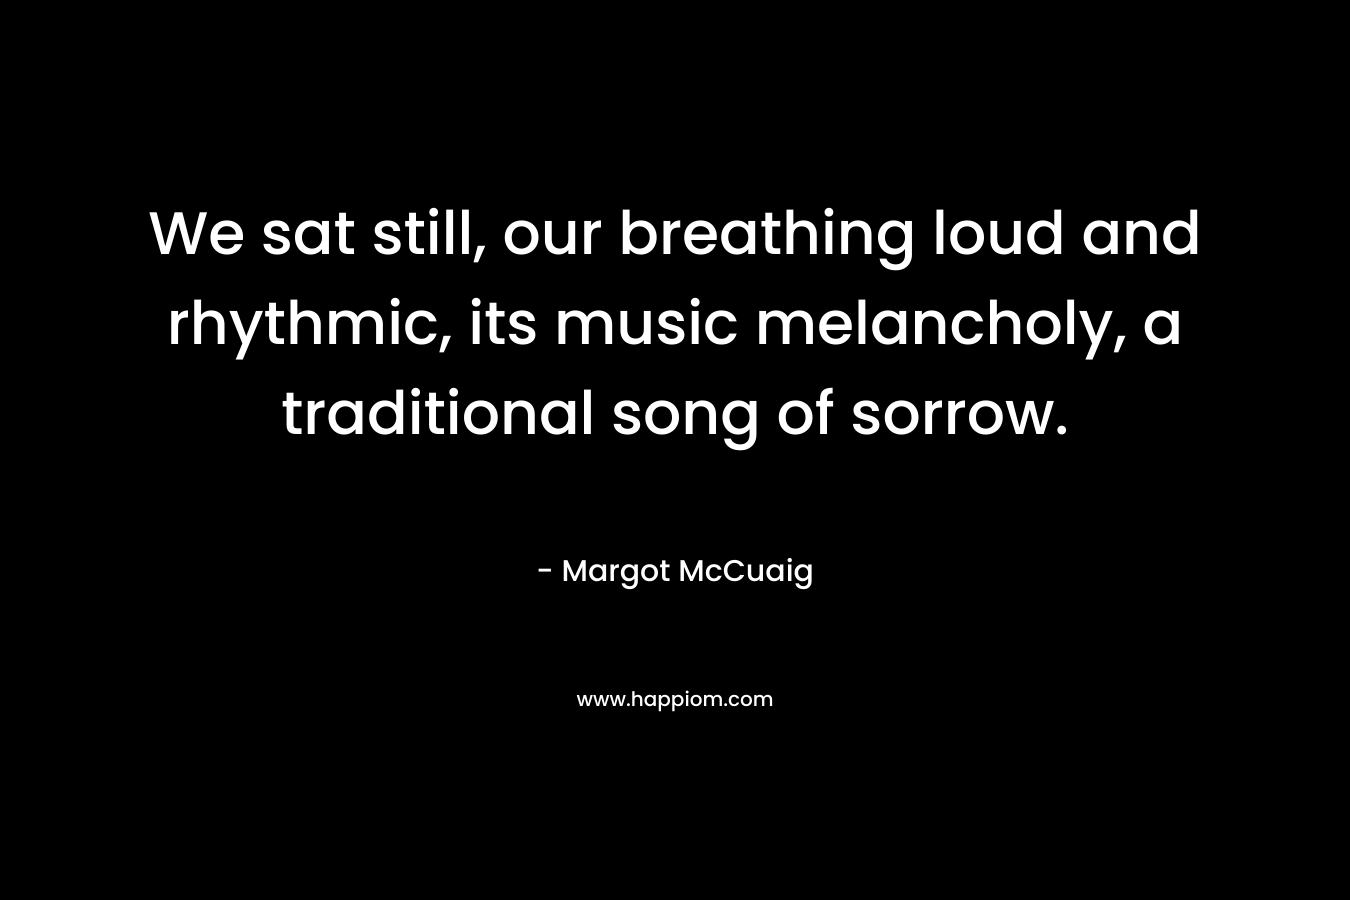 We sat still, our breathing loud and rhythmic, its music melancholy, a traditional song of sorrow. – Margot McCuaig